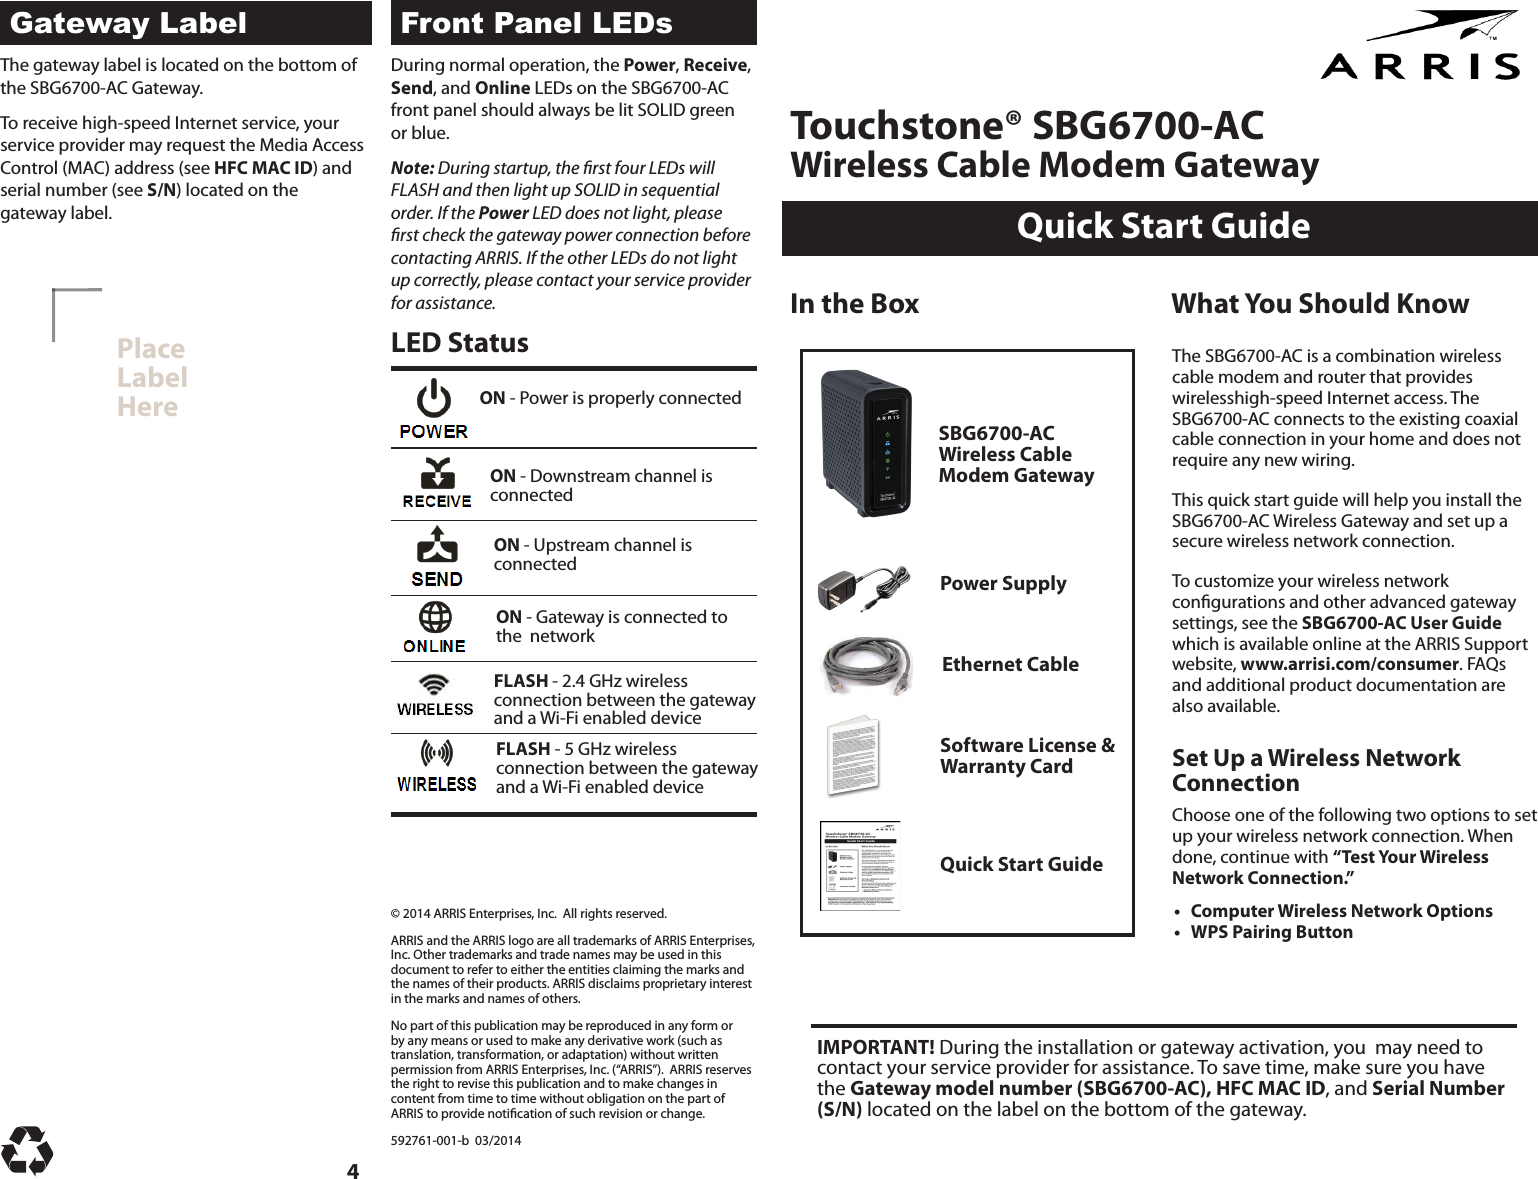 Quick Start GuideTouchstone® SBG6700-AC Wireless Cable Modem GatewayPlaceLabelHereLED StatusIn the BoxSBG6700-AC Wireless Cable Modem GatewayPower SupplyEthernet CableSoftware License &amp; Warranty CardQuick Start GuideWhat You Should KnowON - Power is properly connectedON - Downstream channel is  connectedON - Upstream channel is  connectedON - Gateway is connected to the  networkFLASH - 2.4 GHz wireless  connection between the gateway  and a Wi-Fi enabled deviceDuring normal operation, the Power, Receive, Send, and Online LEDs on the SBG6700-AC front panel should always be lit SOLID green or blue.Note: During startup, the rst four LEDs will FLASH and then light up SOLID in sequential order. If the Power LED does not light, please rst check the gateway power connection before contacting ARRIS. If the other LEDs do not light up correctly, please contact your service provider for assistance.The gateway label is located on the bottom of the SBG6700-AC Gateway. To receive high-speed Internet service, your service provider may request the Media Access Control (MAC) address (see HFC MAC ID) and serial number (see S/N) located on the gateway label.IMPORTANT! During the installation or gateway activation, you  may need to contact your service provider for assistance. To save time, make sure you have the Gateway model number (SBG6700-AC), HFC MAC ID, and Serial Number (S/N) located on the label on the bottom of the gateway.© 2014 ARRIS Enterprises, Inc.  All rights reserved.  ARRIS and the ARRIS logo are all trademarks of ARRIS Enterprises, Inc. Other trademarks and trade names may be used in this document to refer to either the entities claiming the marks and the names of their products. ARRIS disclaims proprietary interest in the marks and names of others. No part of this publication may be reproduced in any form or by any means or used to make any derivative work (such as translation, transformation, or adaptation) without written permission from ARRIS Enterprises, Inc. (“ARRIS”).  ARRIS reserves the right to revise this publication and to make changes in content from time to time without obligation on the part of ARRIS to provide notication of such revision or change. 592761-001-b  03/20144FLASH - 5 GHz wireless  connection between the gateway and a Wi-Fi enabled deviceThe SBG6700-AC is a combination wireless cable modem and router that provides wirelesshigh-speed Internet access. The SBG6700-AC connects to the existing coaxial cable connection in your home and does not require any new wiring.This quick start guide will help you install the SBG6700-AC Wireless Gateway and set up a secure wireless network connection. To customize your wireless network congurations and other advanced gateway settings, see the SBG6700-AC User Guide which is available online at the ARRIS Support website, www.arrisi.com/consumer. FAQs and additional product documentation are also available.Set Up a Wireless Network ConnectionChoose one of the following two options to set up your wireless network connection. When done, continue with “Test Your Wireless Network Connection.”  • Computer Wireless Network Options• WPS Pairing ButtonGateway Label Front Panel LEDs